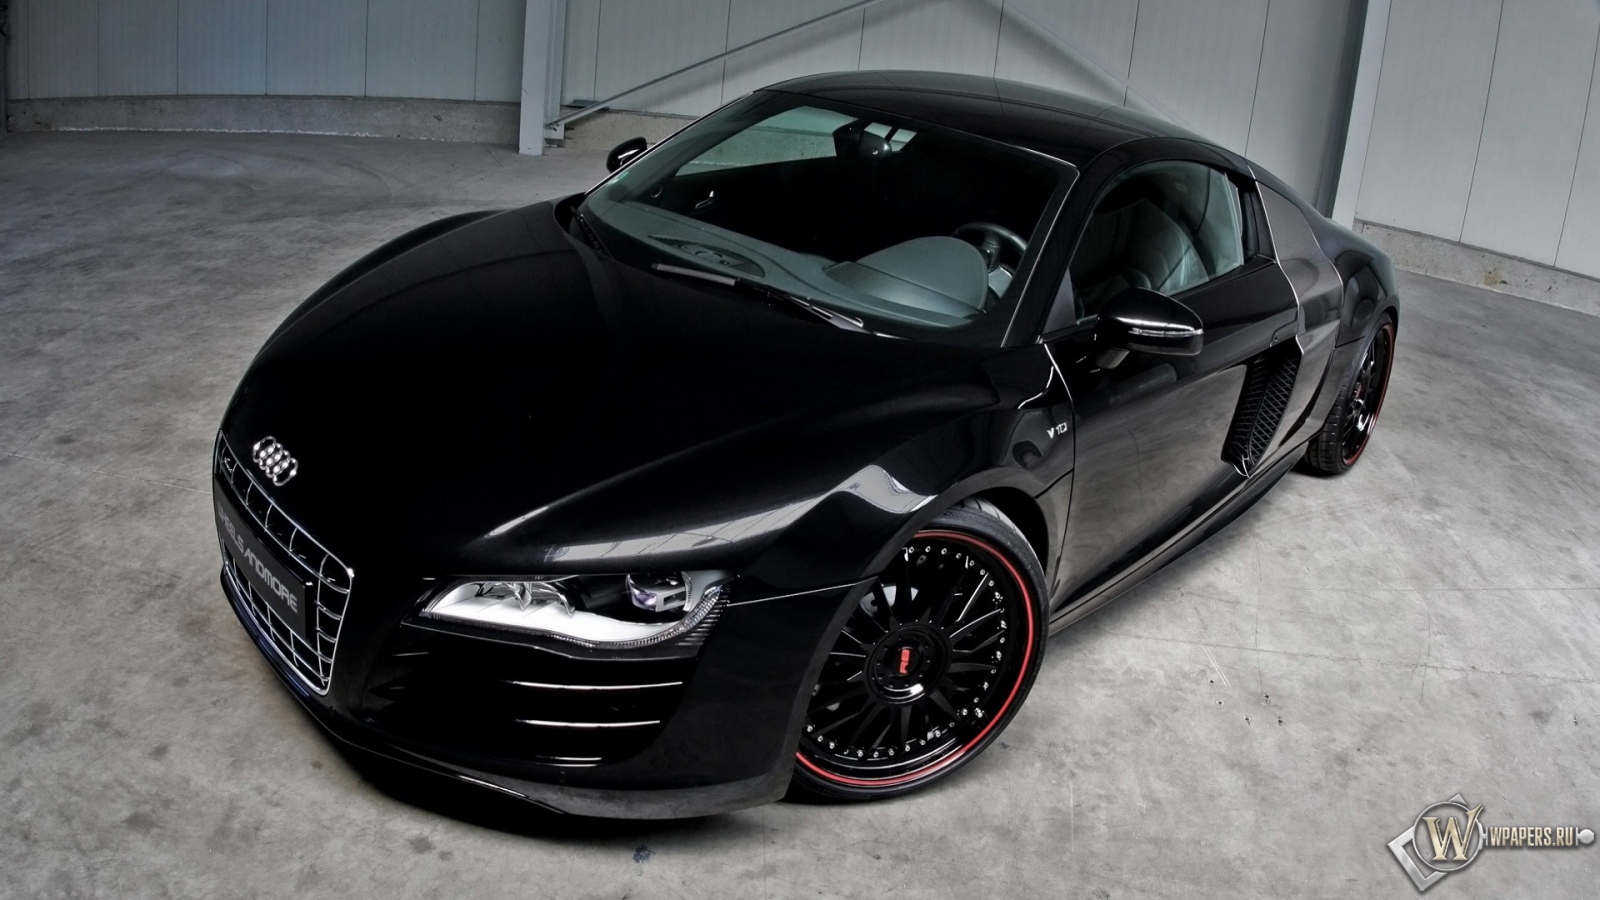 2011 Wheelsandmore Audi R8 V10 .6 - Front Angle Top 1600x900